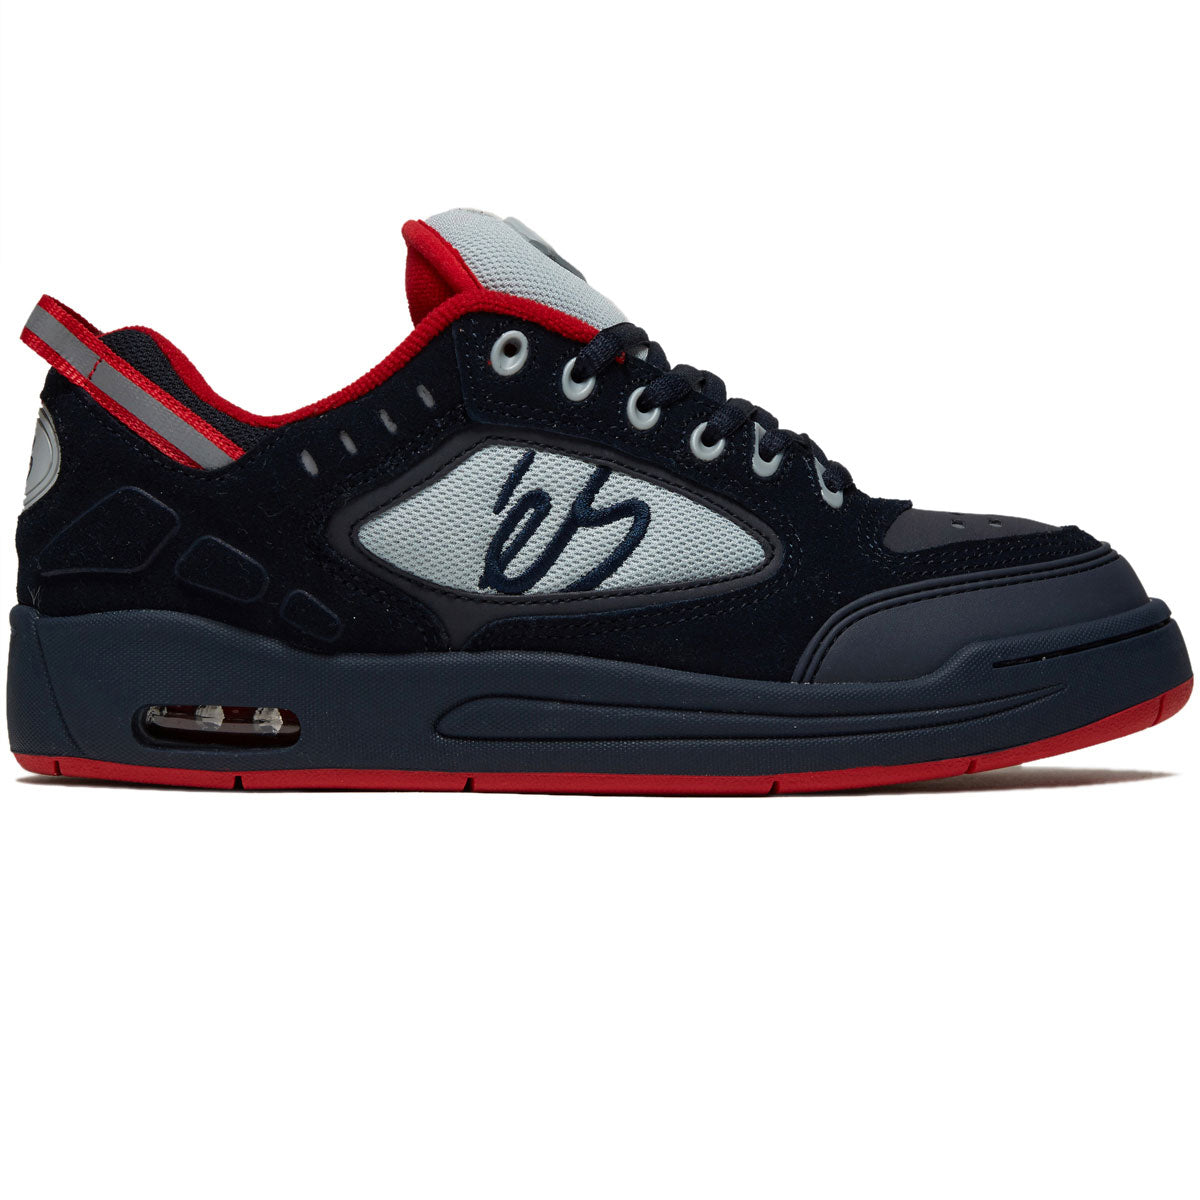 eS Creager Shoes - Navy/Grey/Red image 1